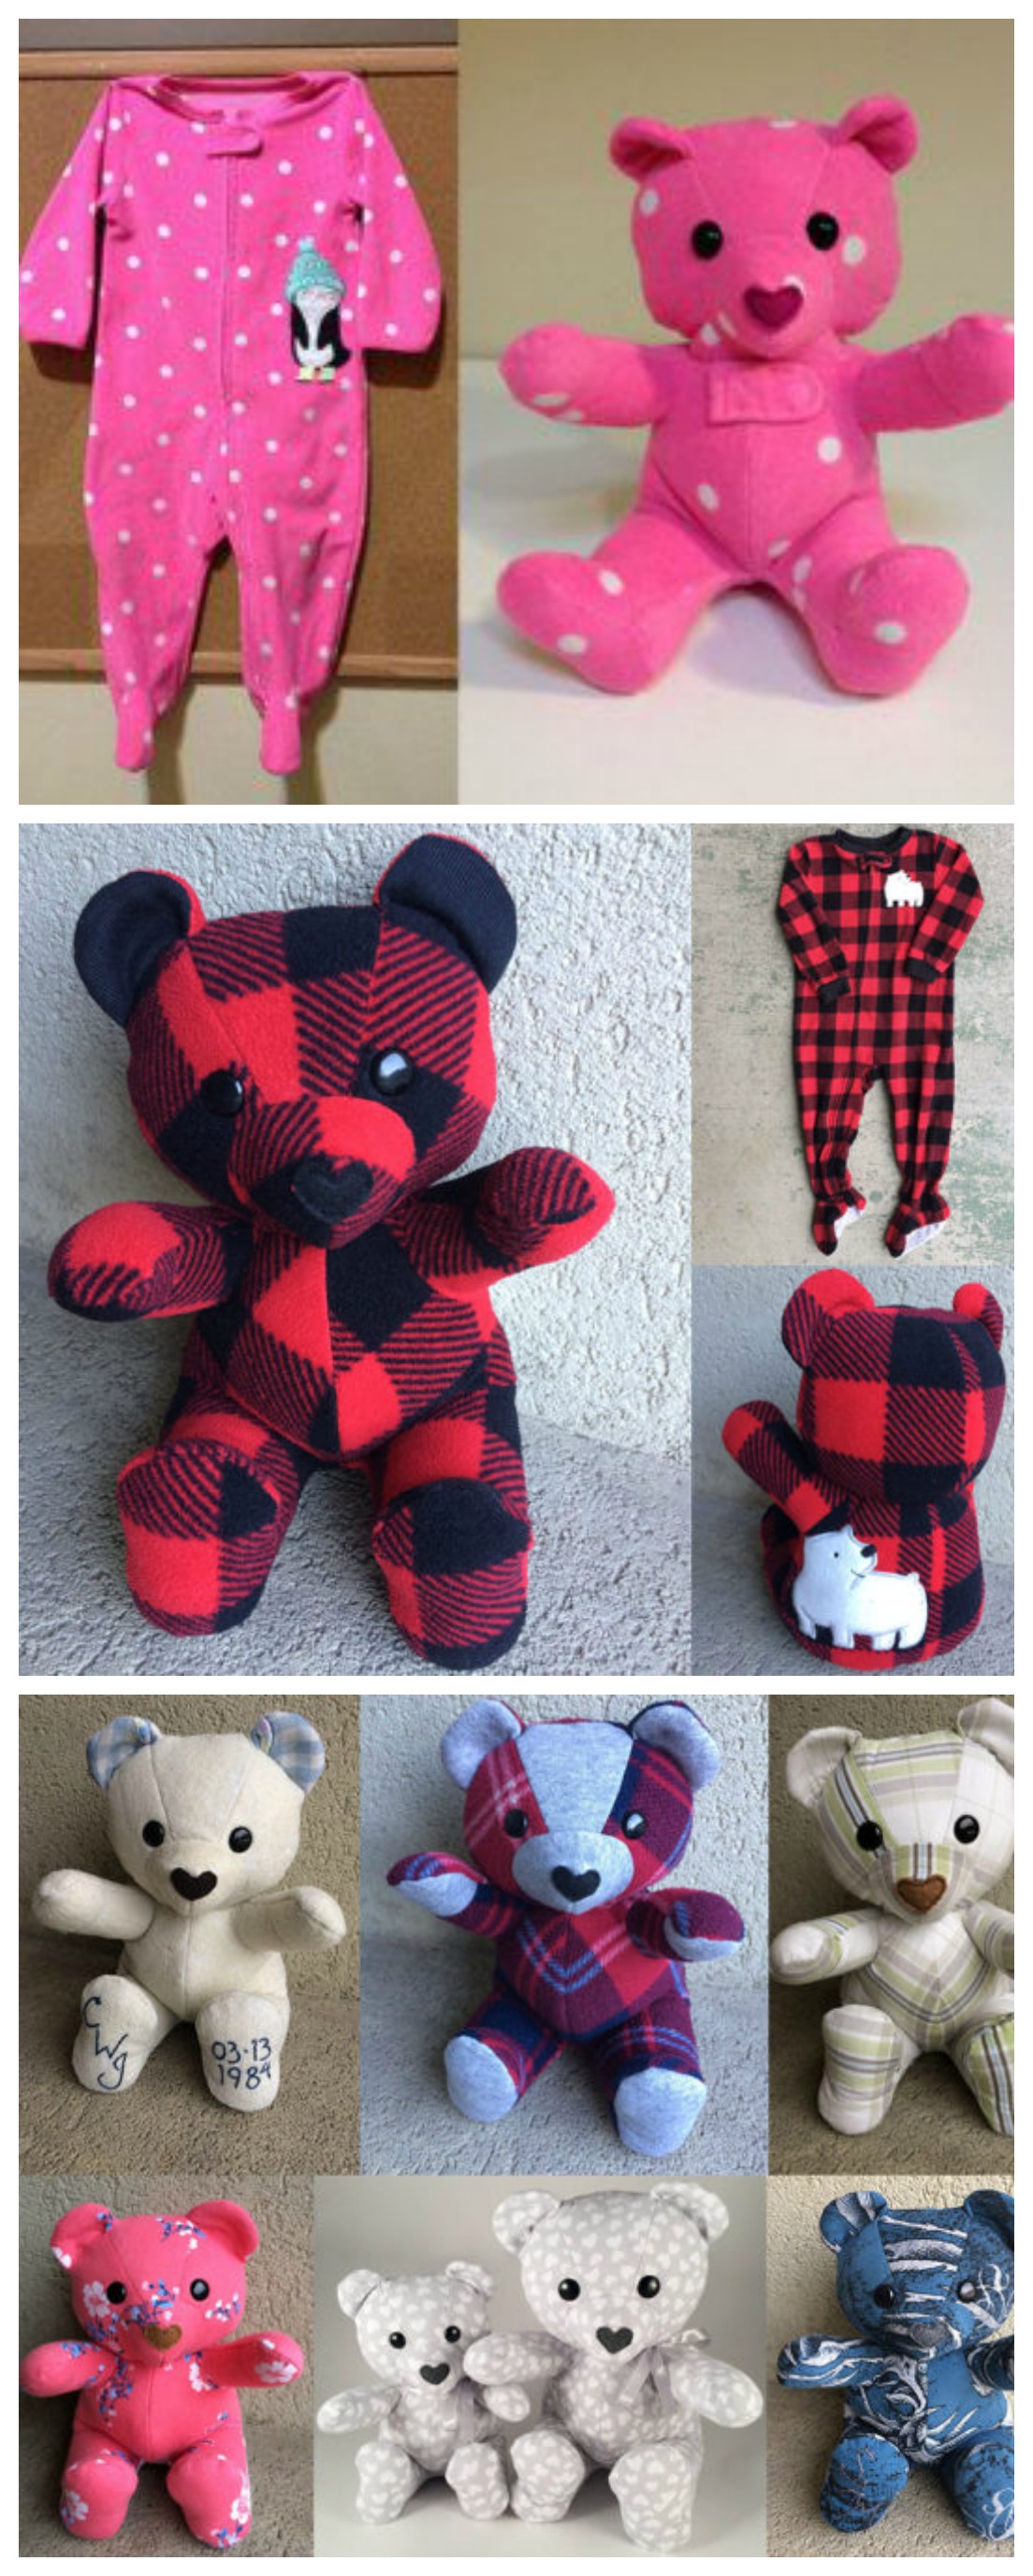 teddy made out of baby clothes